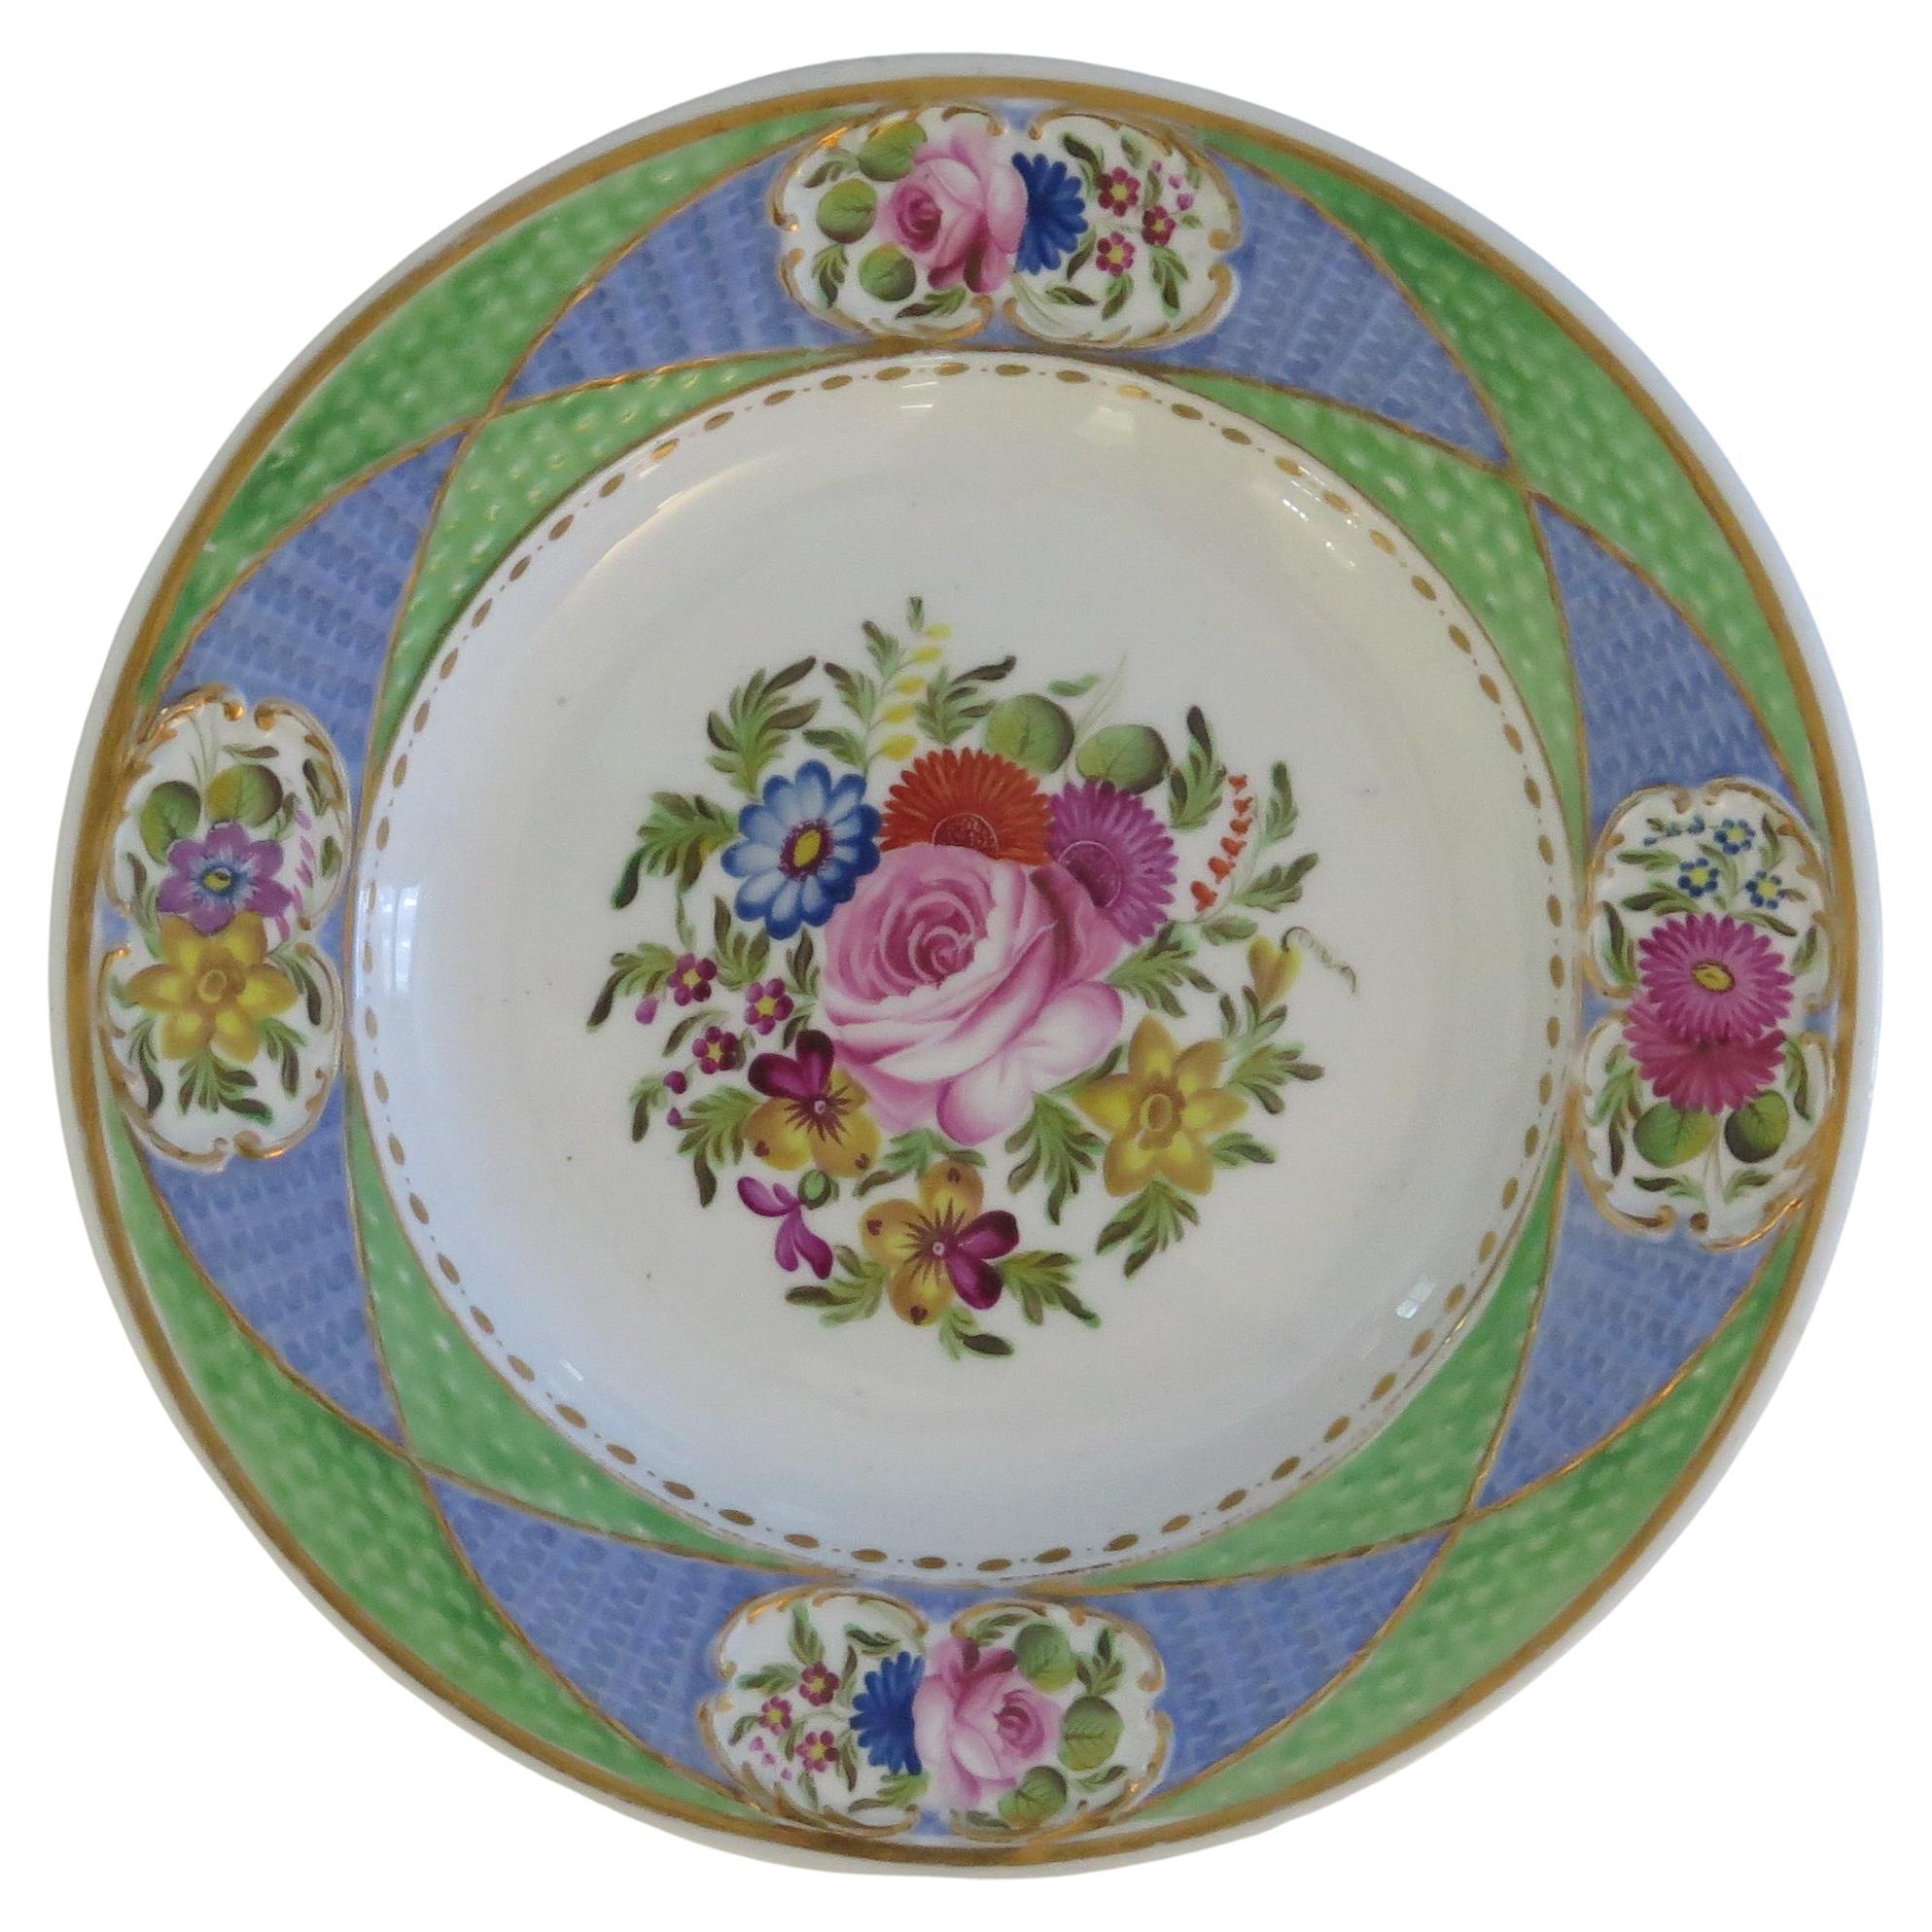 Fine Newhall Porcelain Plate Hand Painted Pattern 2050, Georgian circa 1820 For Sale